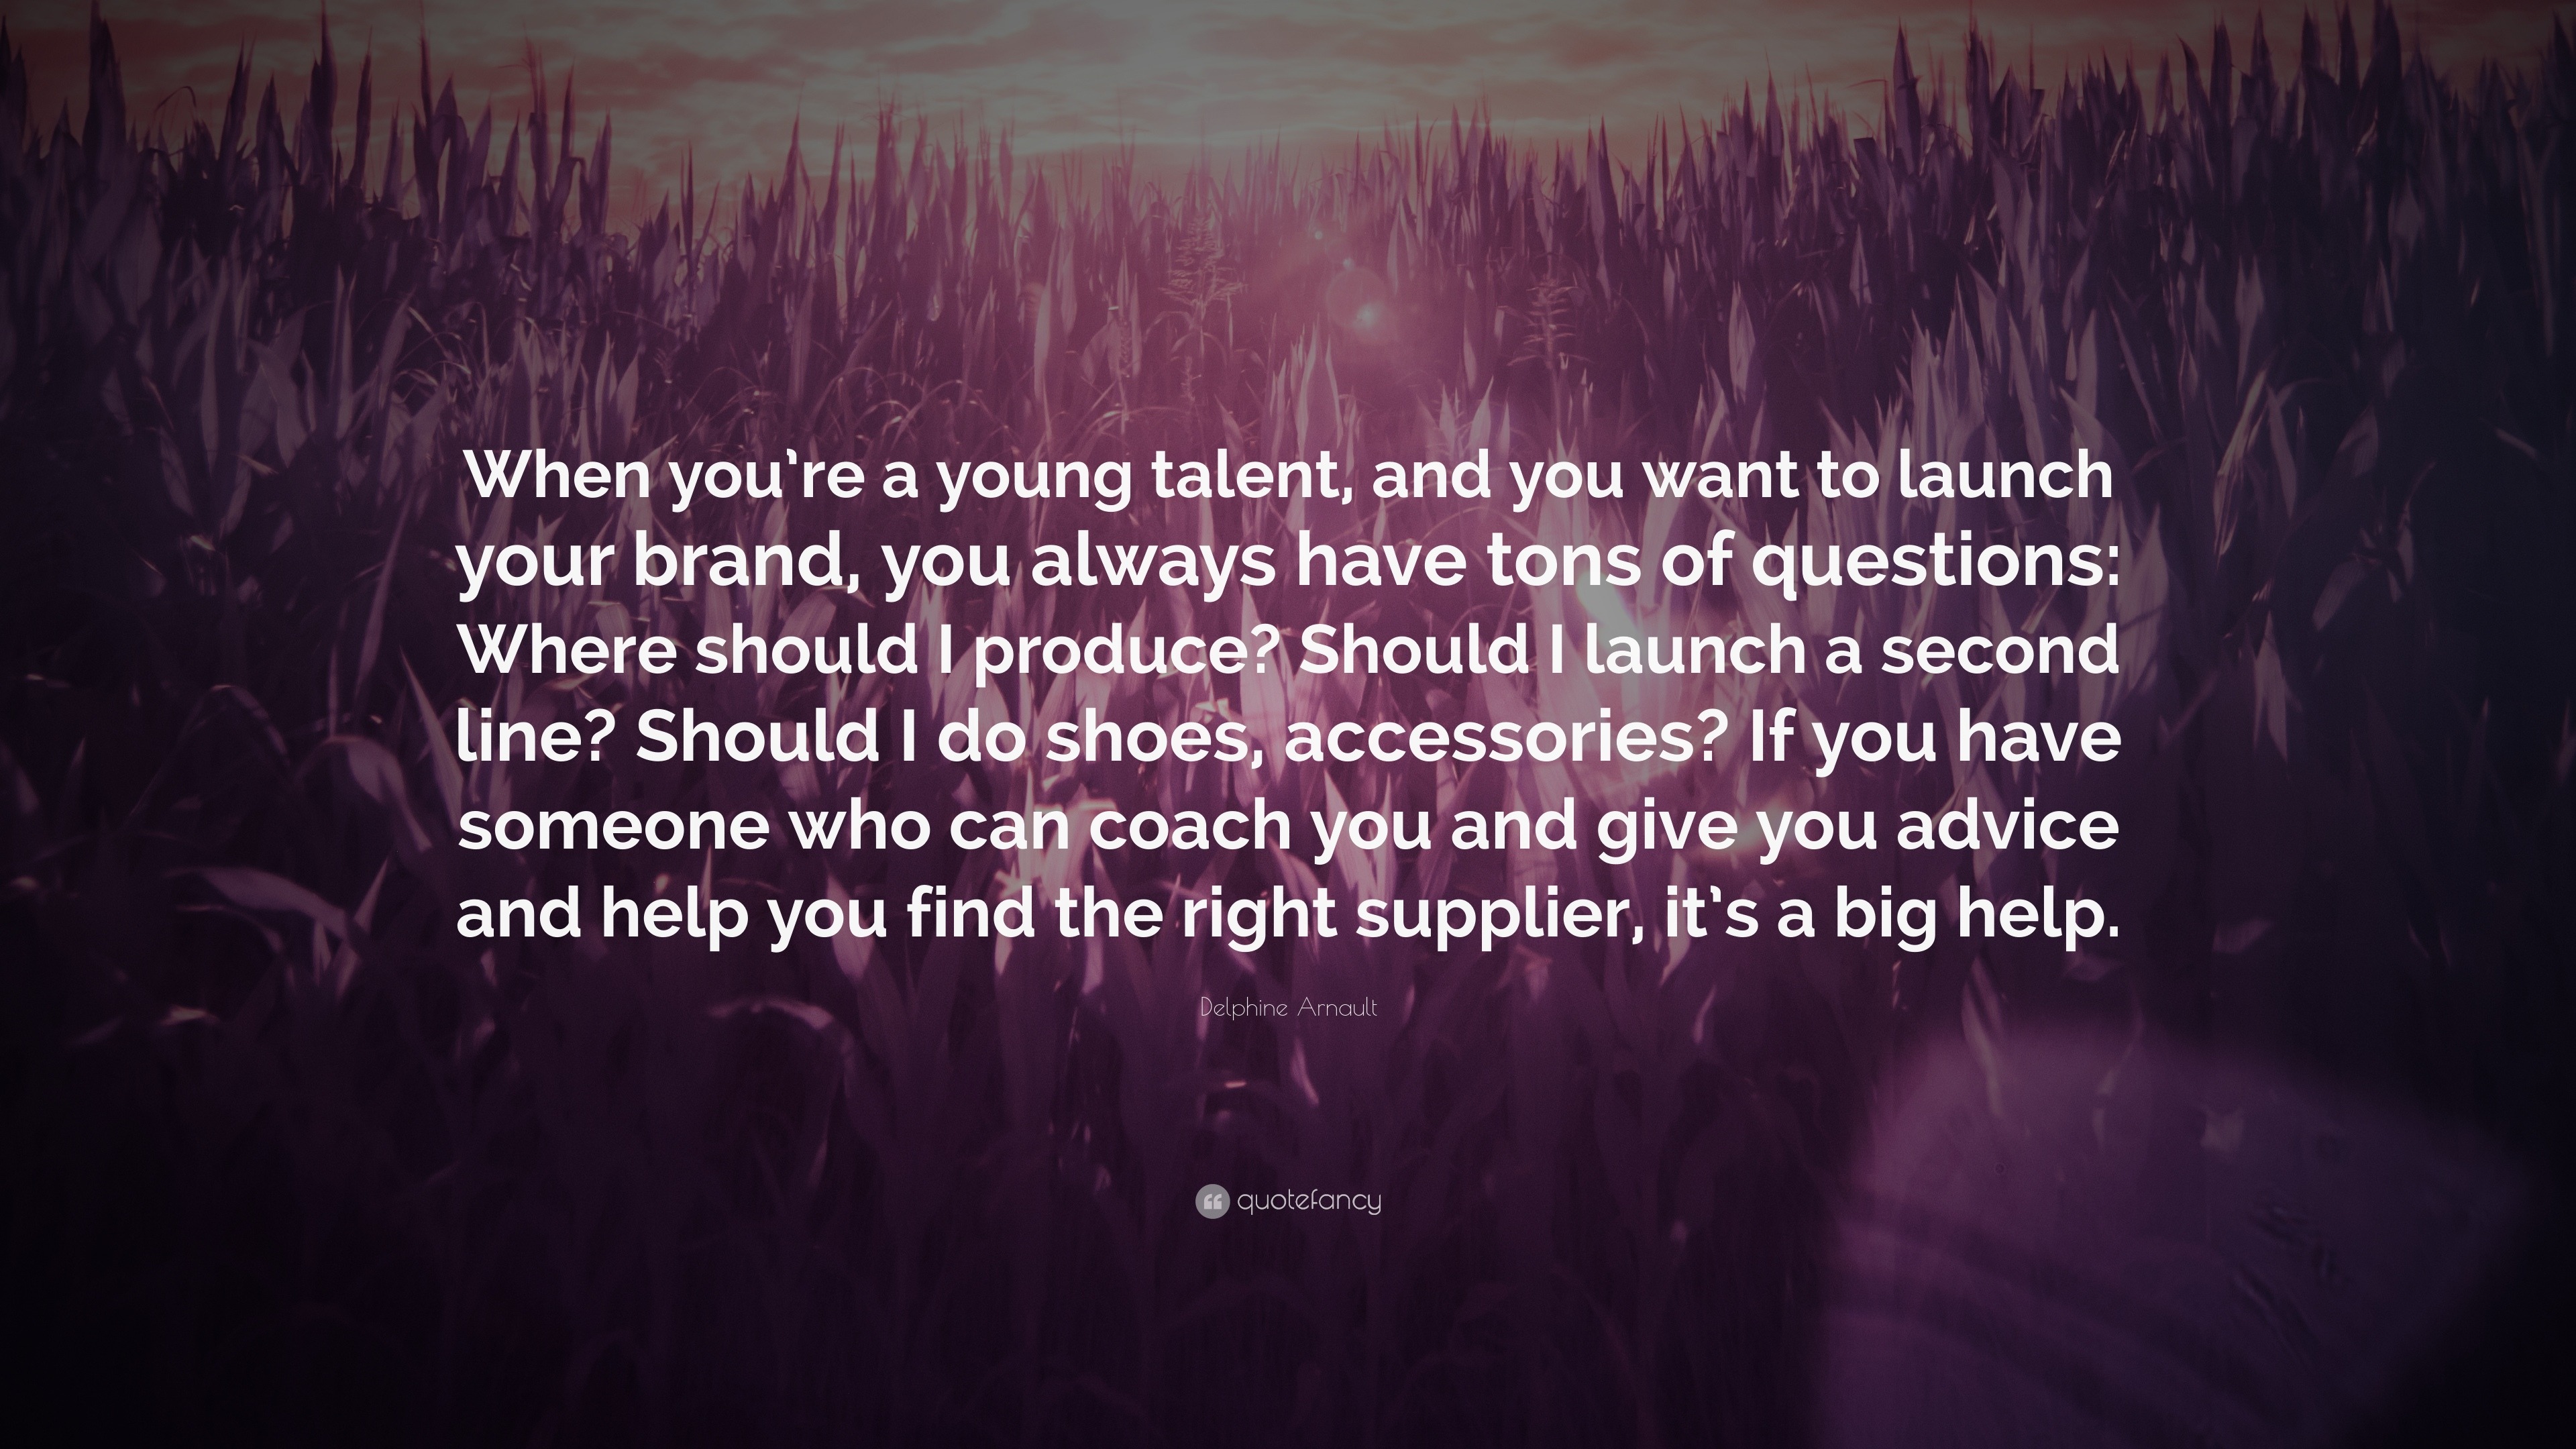 Delphine Arnault Quote: “When you're a young talent, and want to brand, you always have tons questions: Where should I produce...”